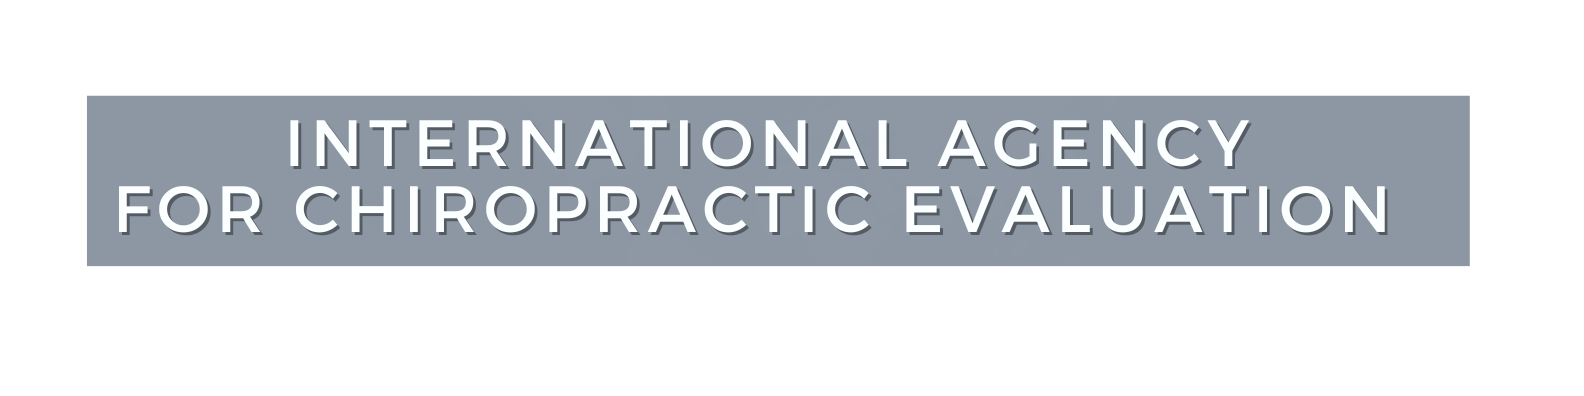 International Agency for Chiropractic Evaluation